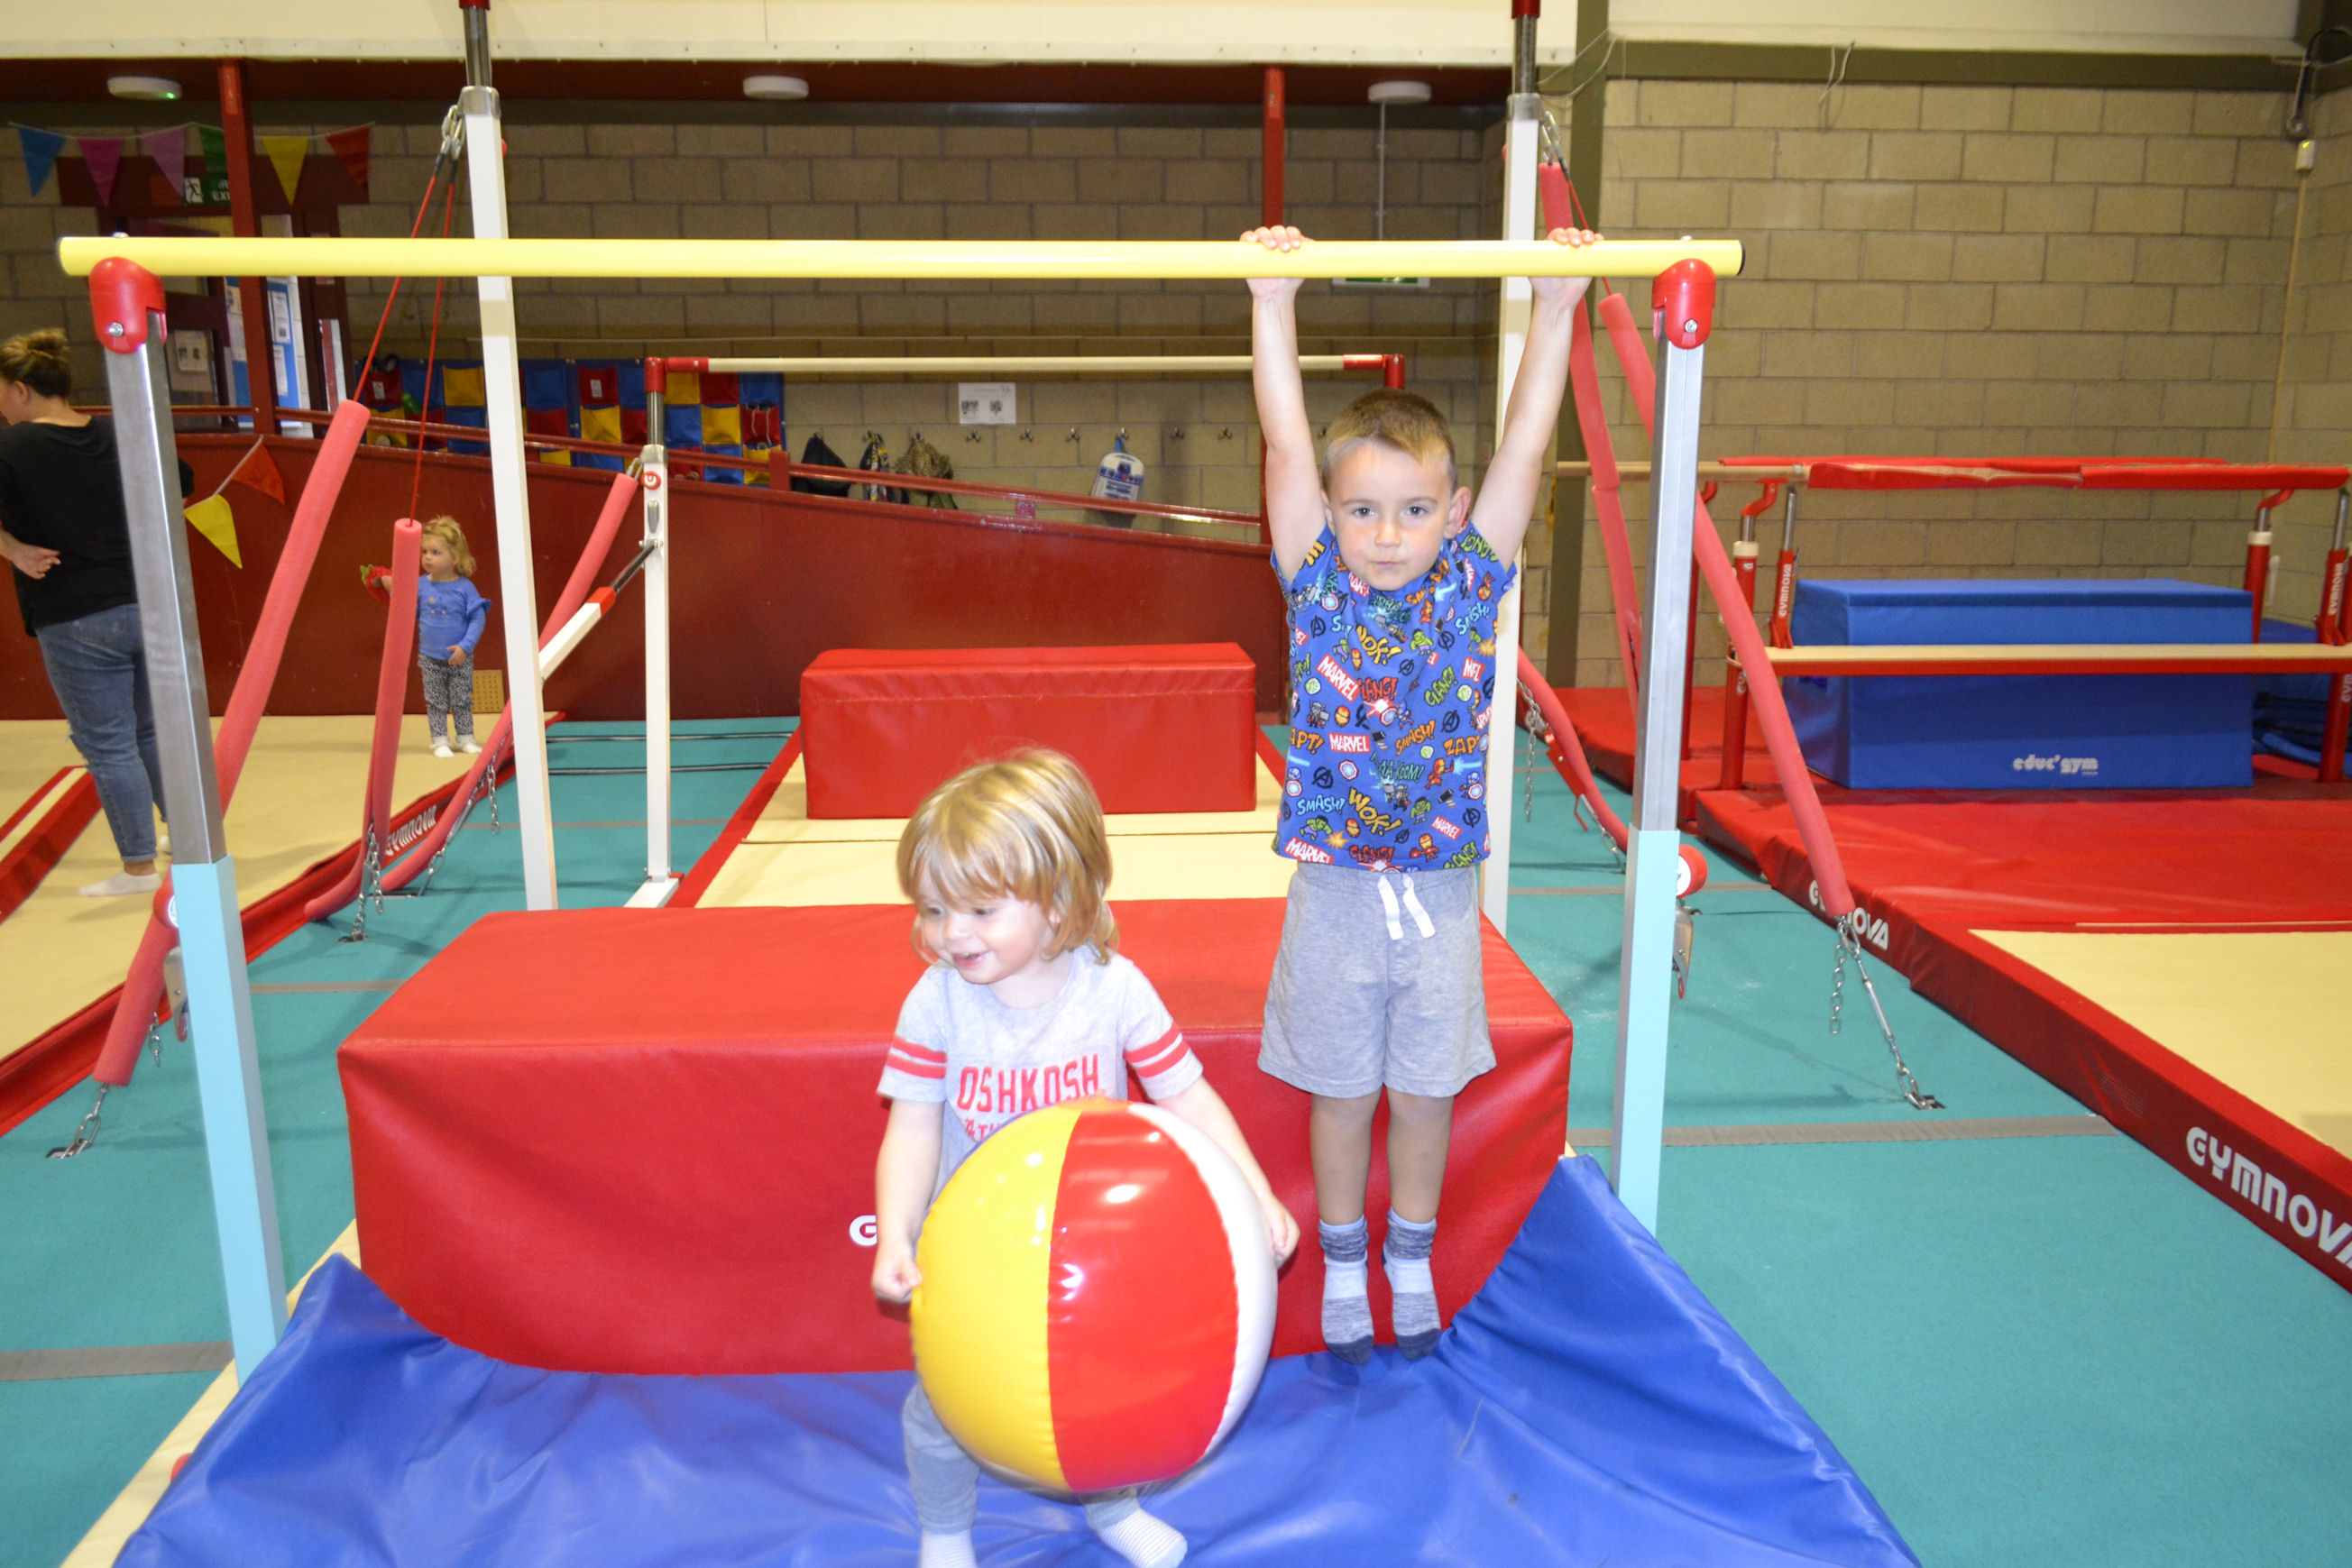 image of Gymnastics - boy hanging on low bar and another with a beach ball